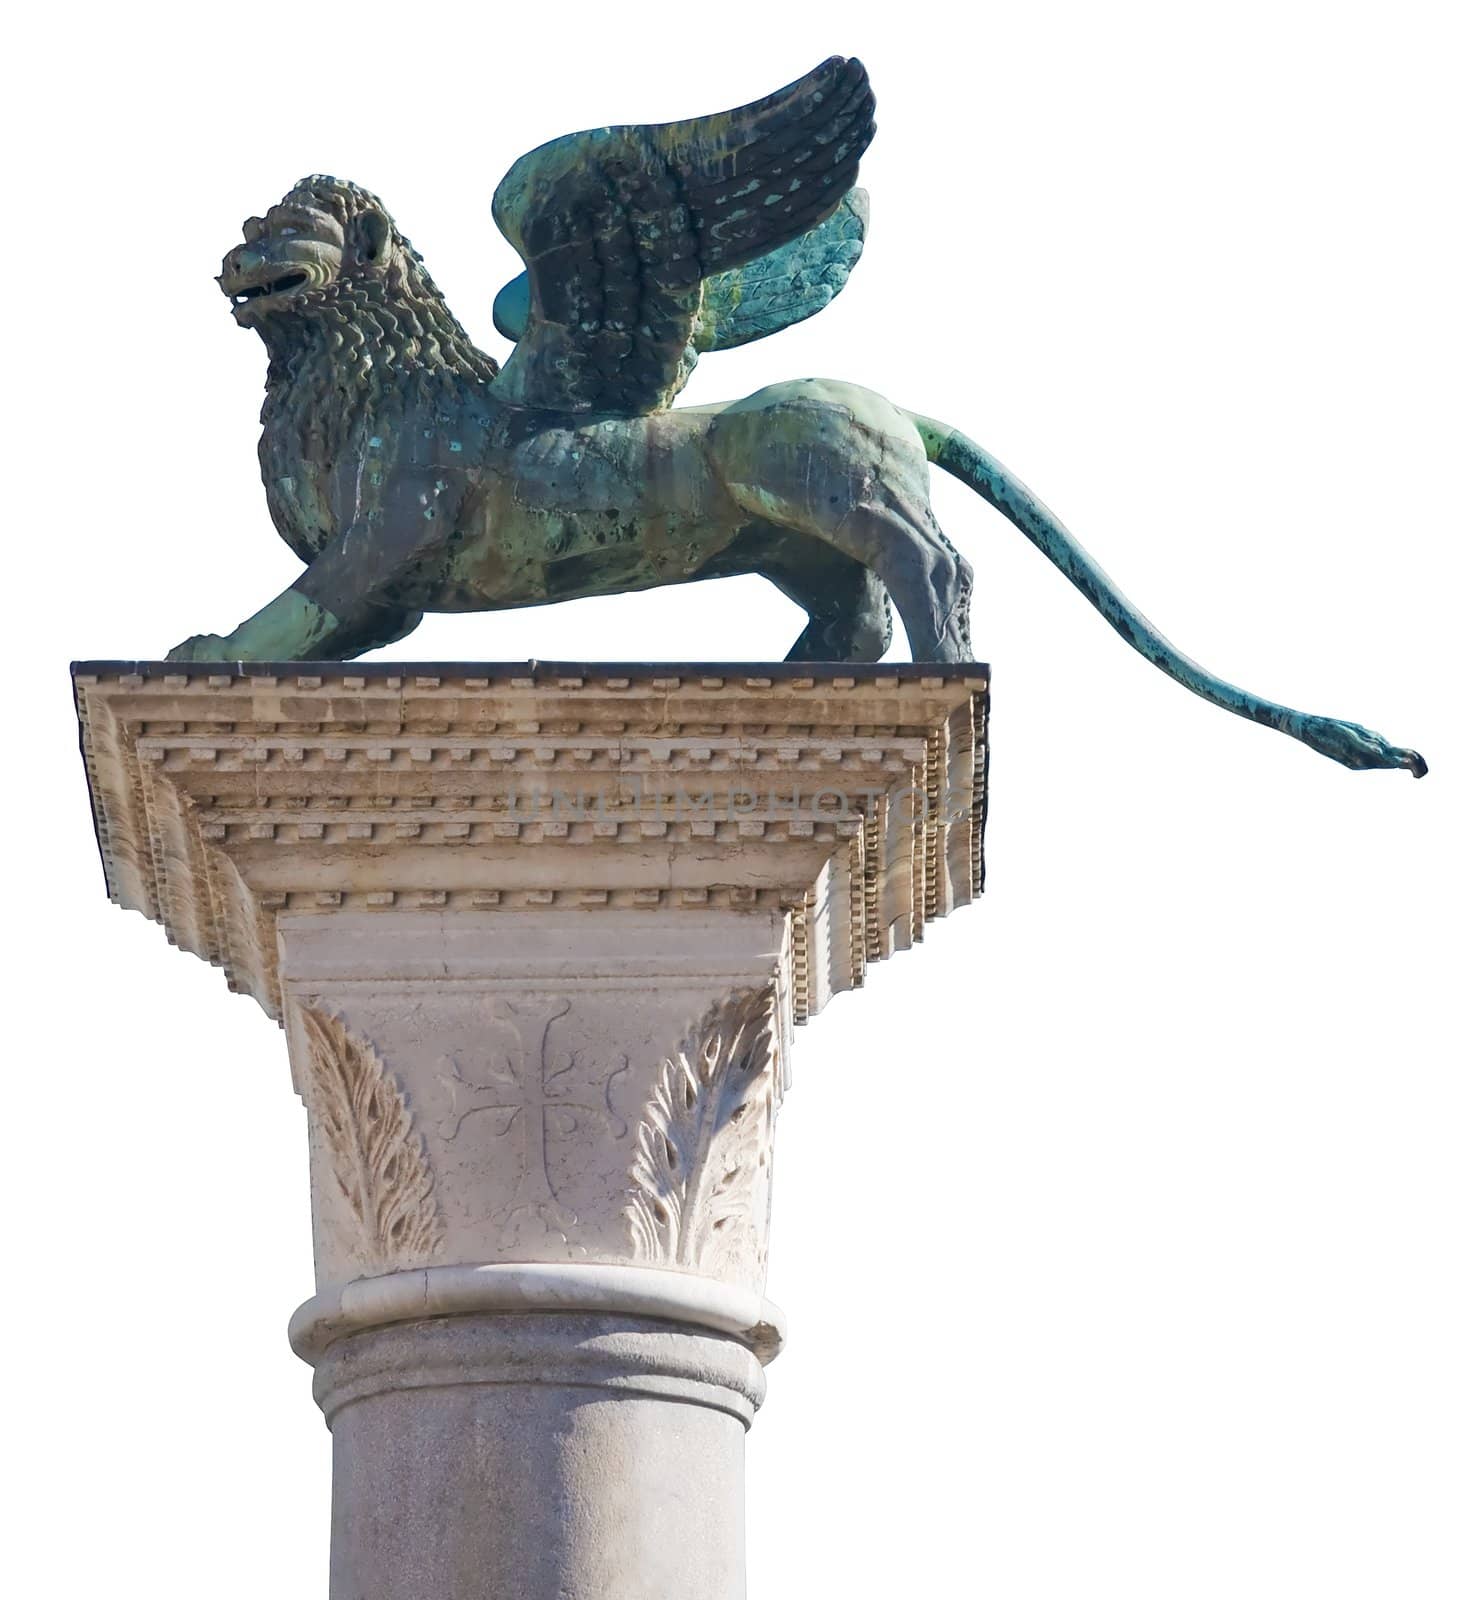 The winged lion - the symbol of Venice. The sculpture on the square of St. Mark in Venice. The isolated image.